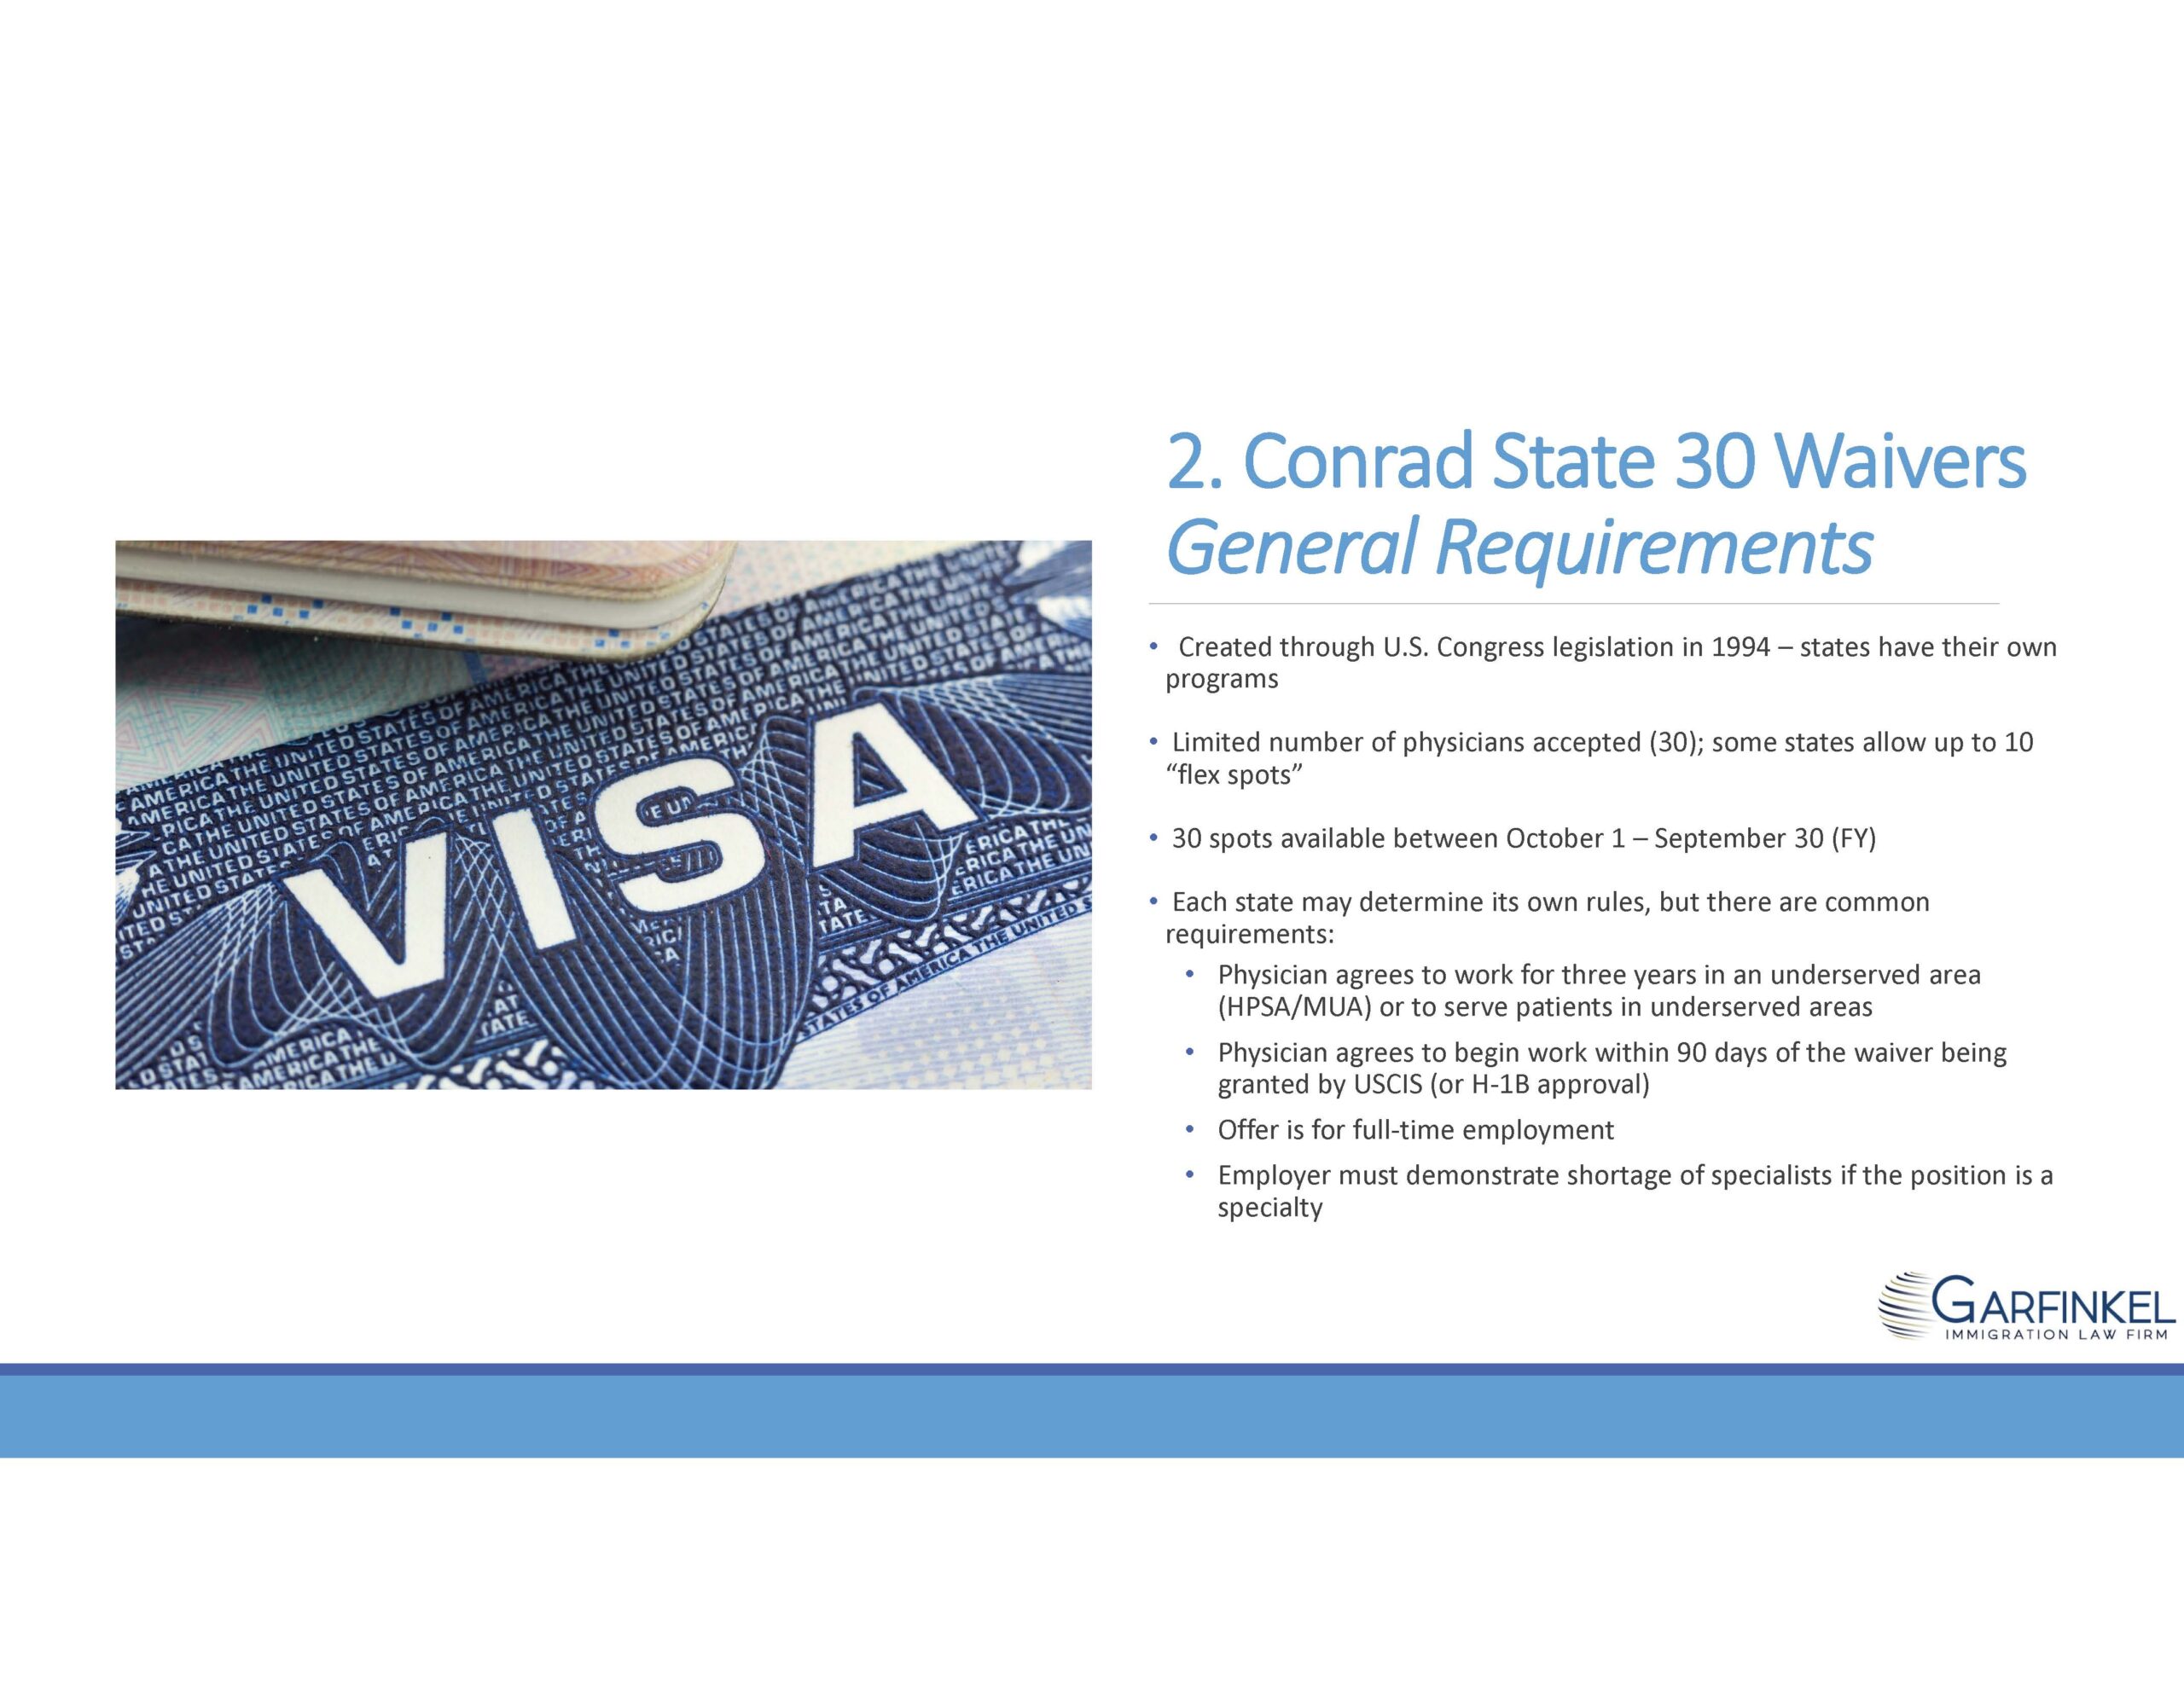 Conrad State 30 Waivers: General Requirements.   Created through U.S. Congress legislation in 1994 – states have their own programs. Limited number of physicians accepted (30); some states allow up to 10 “flex spots." 30 spots available between October 1 – September 30 (FY). Each state may determine its own rules, but there are common requirements: Physician agrees to work for three years in an underserved area (HPSA/MUA) or to serve patients in underserved areas; Physician agrees to begin work within 90 days of the waiver being granted by USCIS (or H-1B approval); Offer is for full-time employment; Employer must demonstrate shortage of specialists if the position is a specialty.